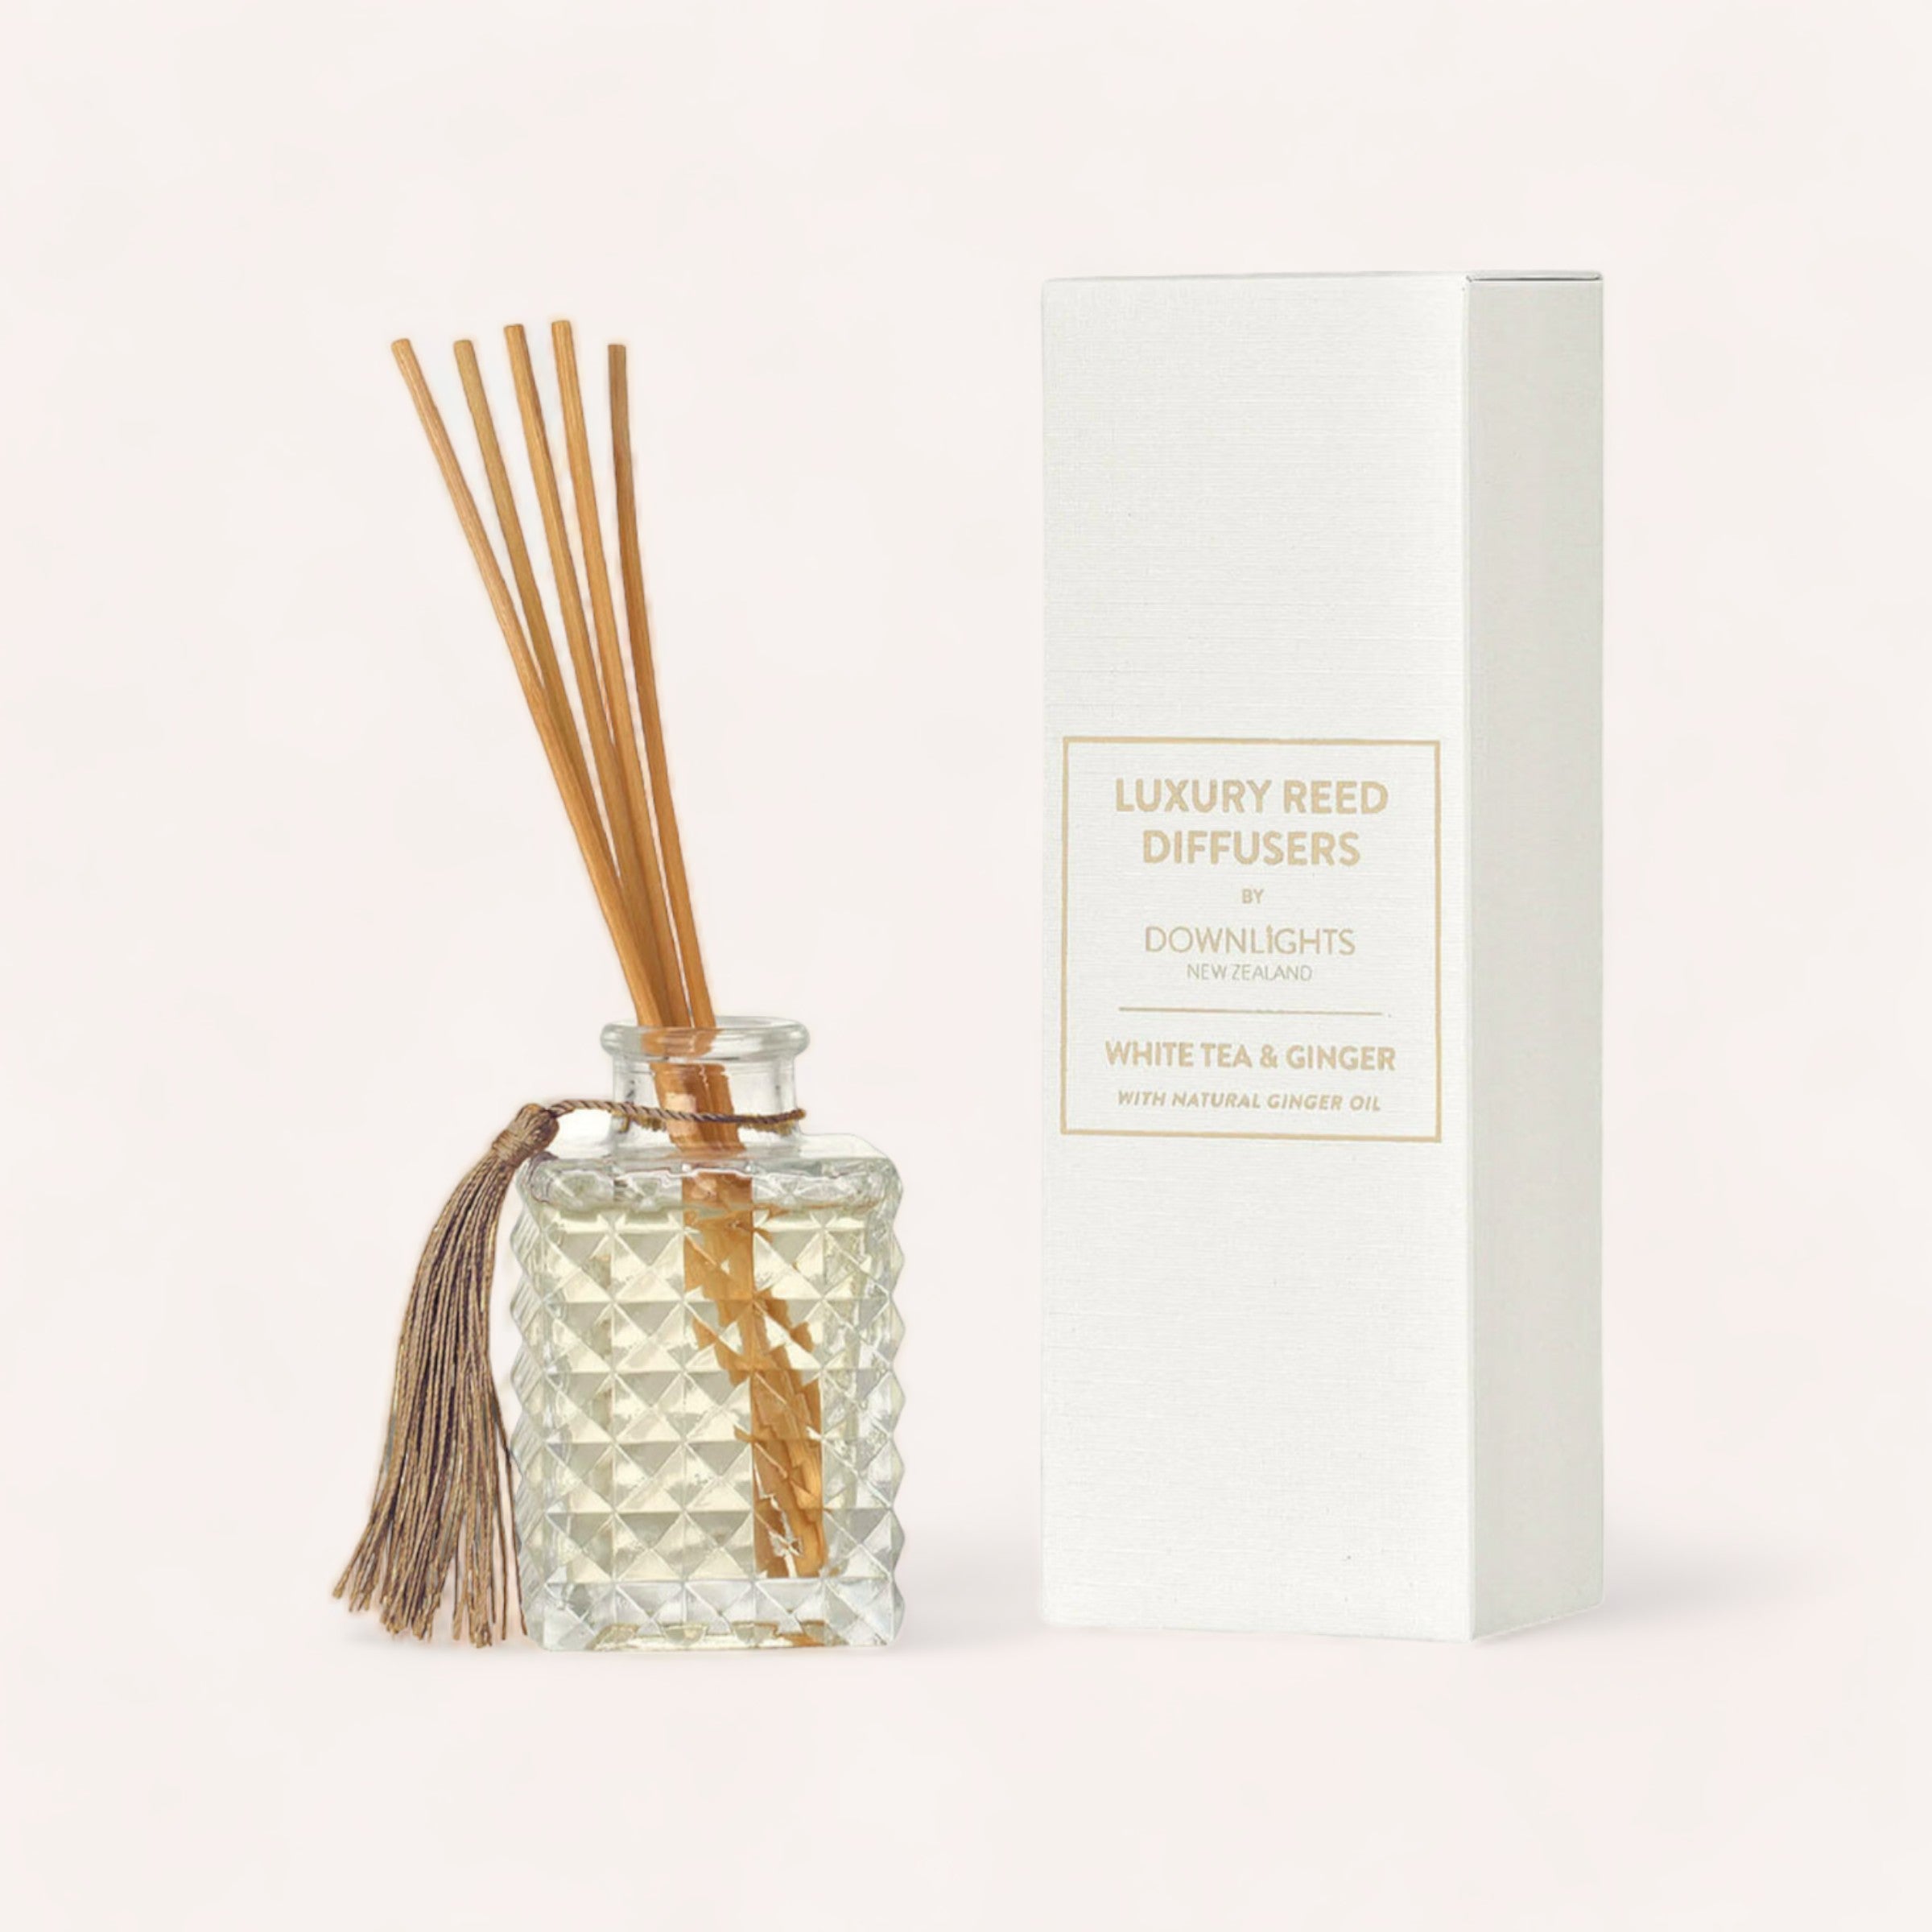 white tea & ginger luxury reed diffuser by downlights nz